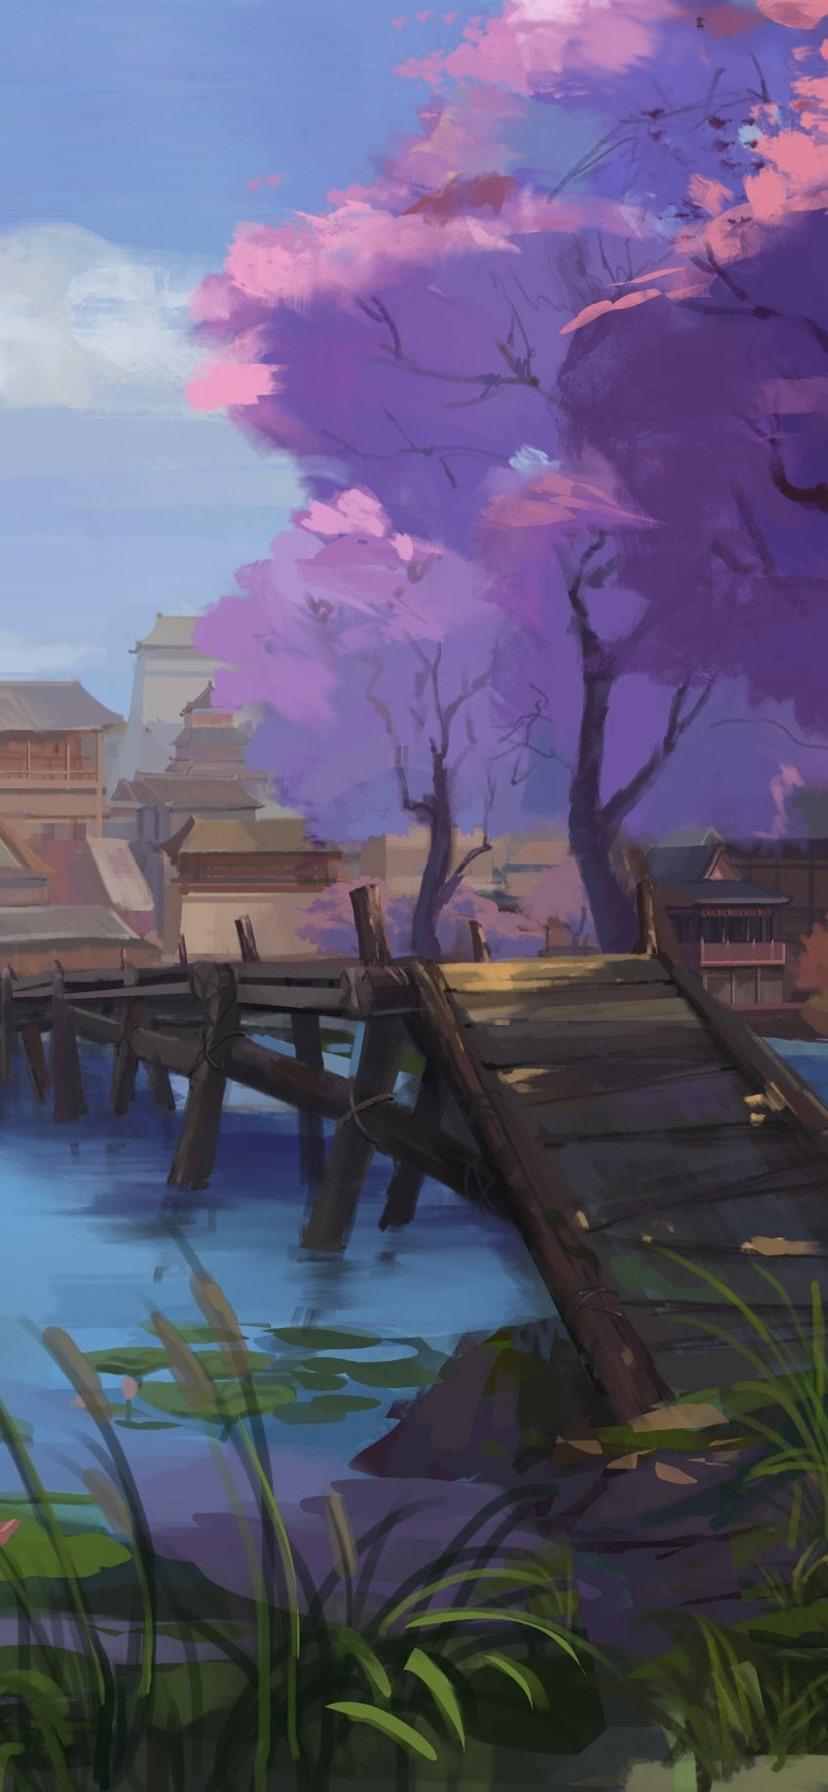 Watercolor painting, China, village, retro style 828x1792 iPhone XR